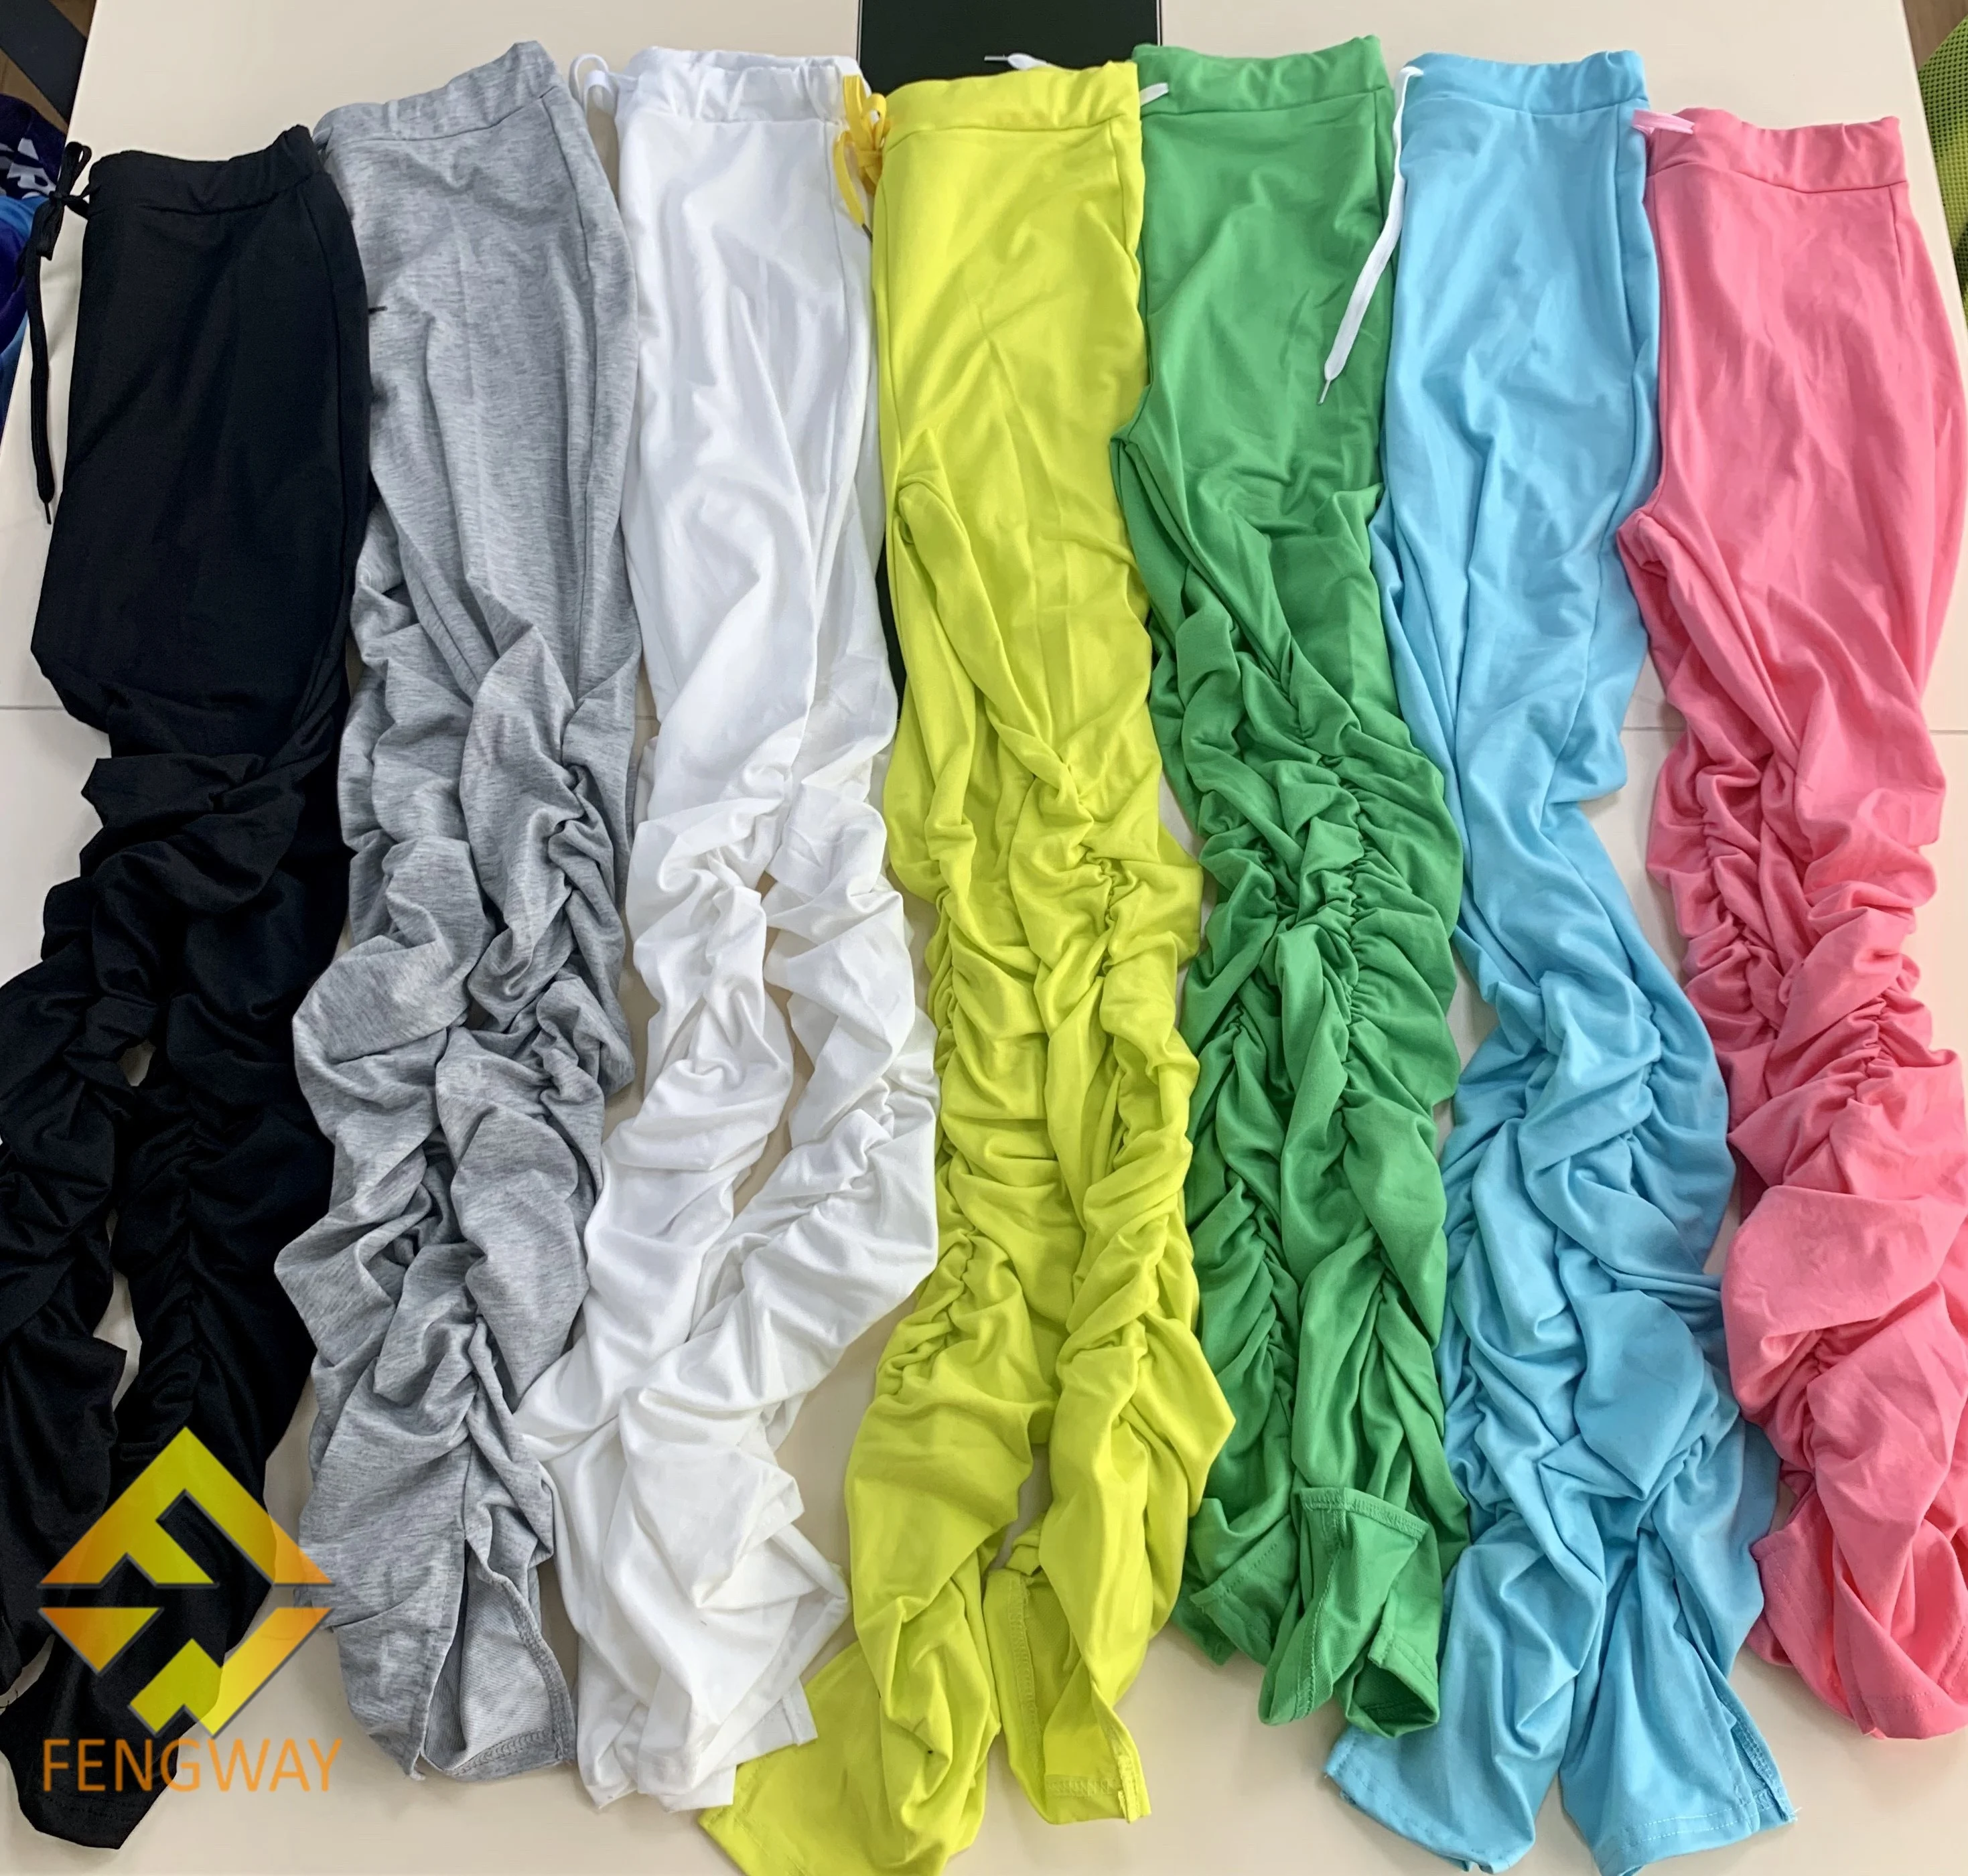 

xs-3xl 2022 new arrivals Fashion trousers stacked pant jogger leggings stacked sweat pants, White, yellow, gray, green, black, pink, blue